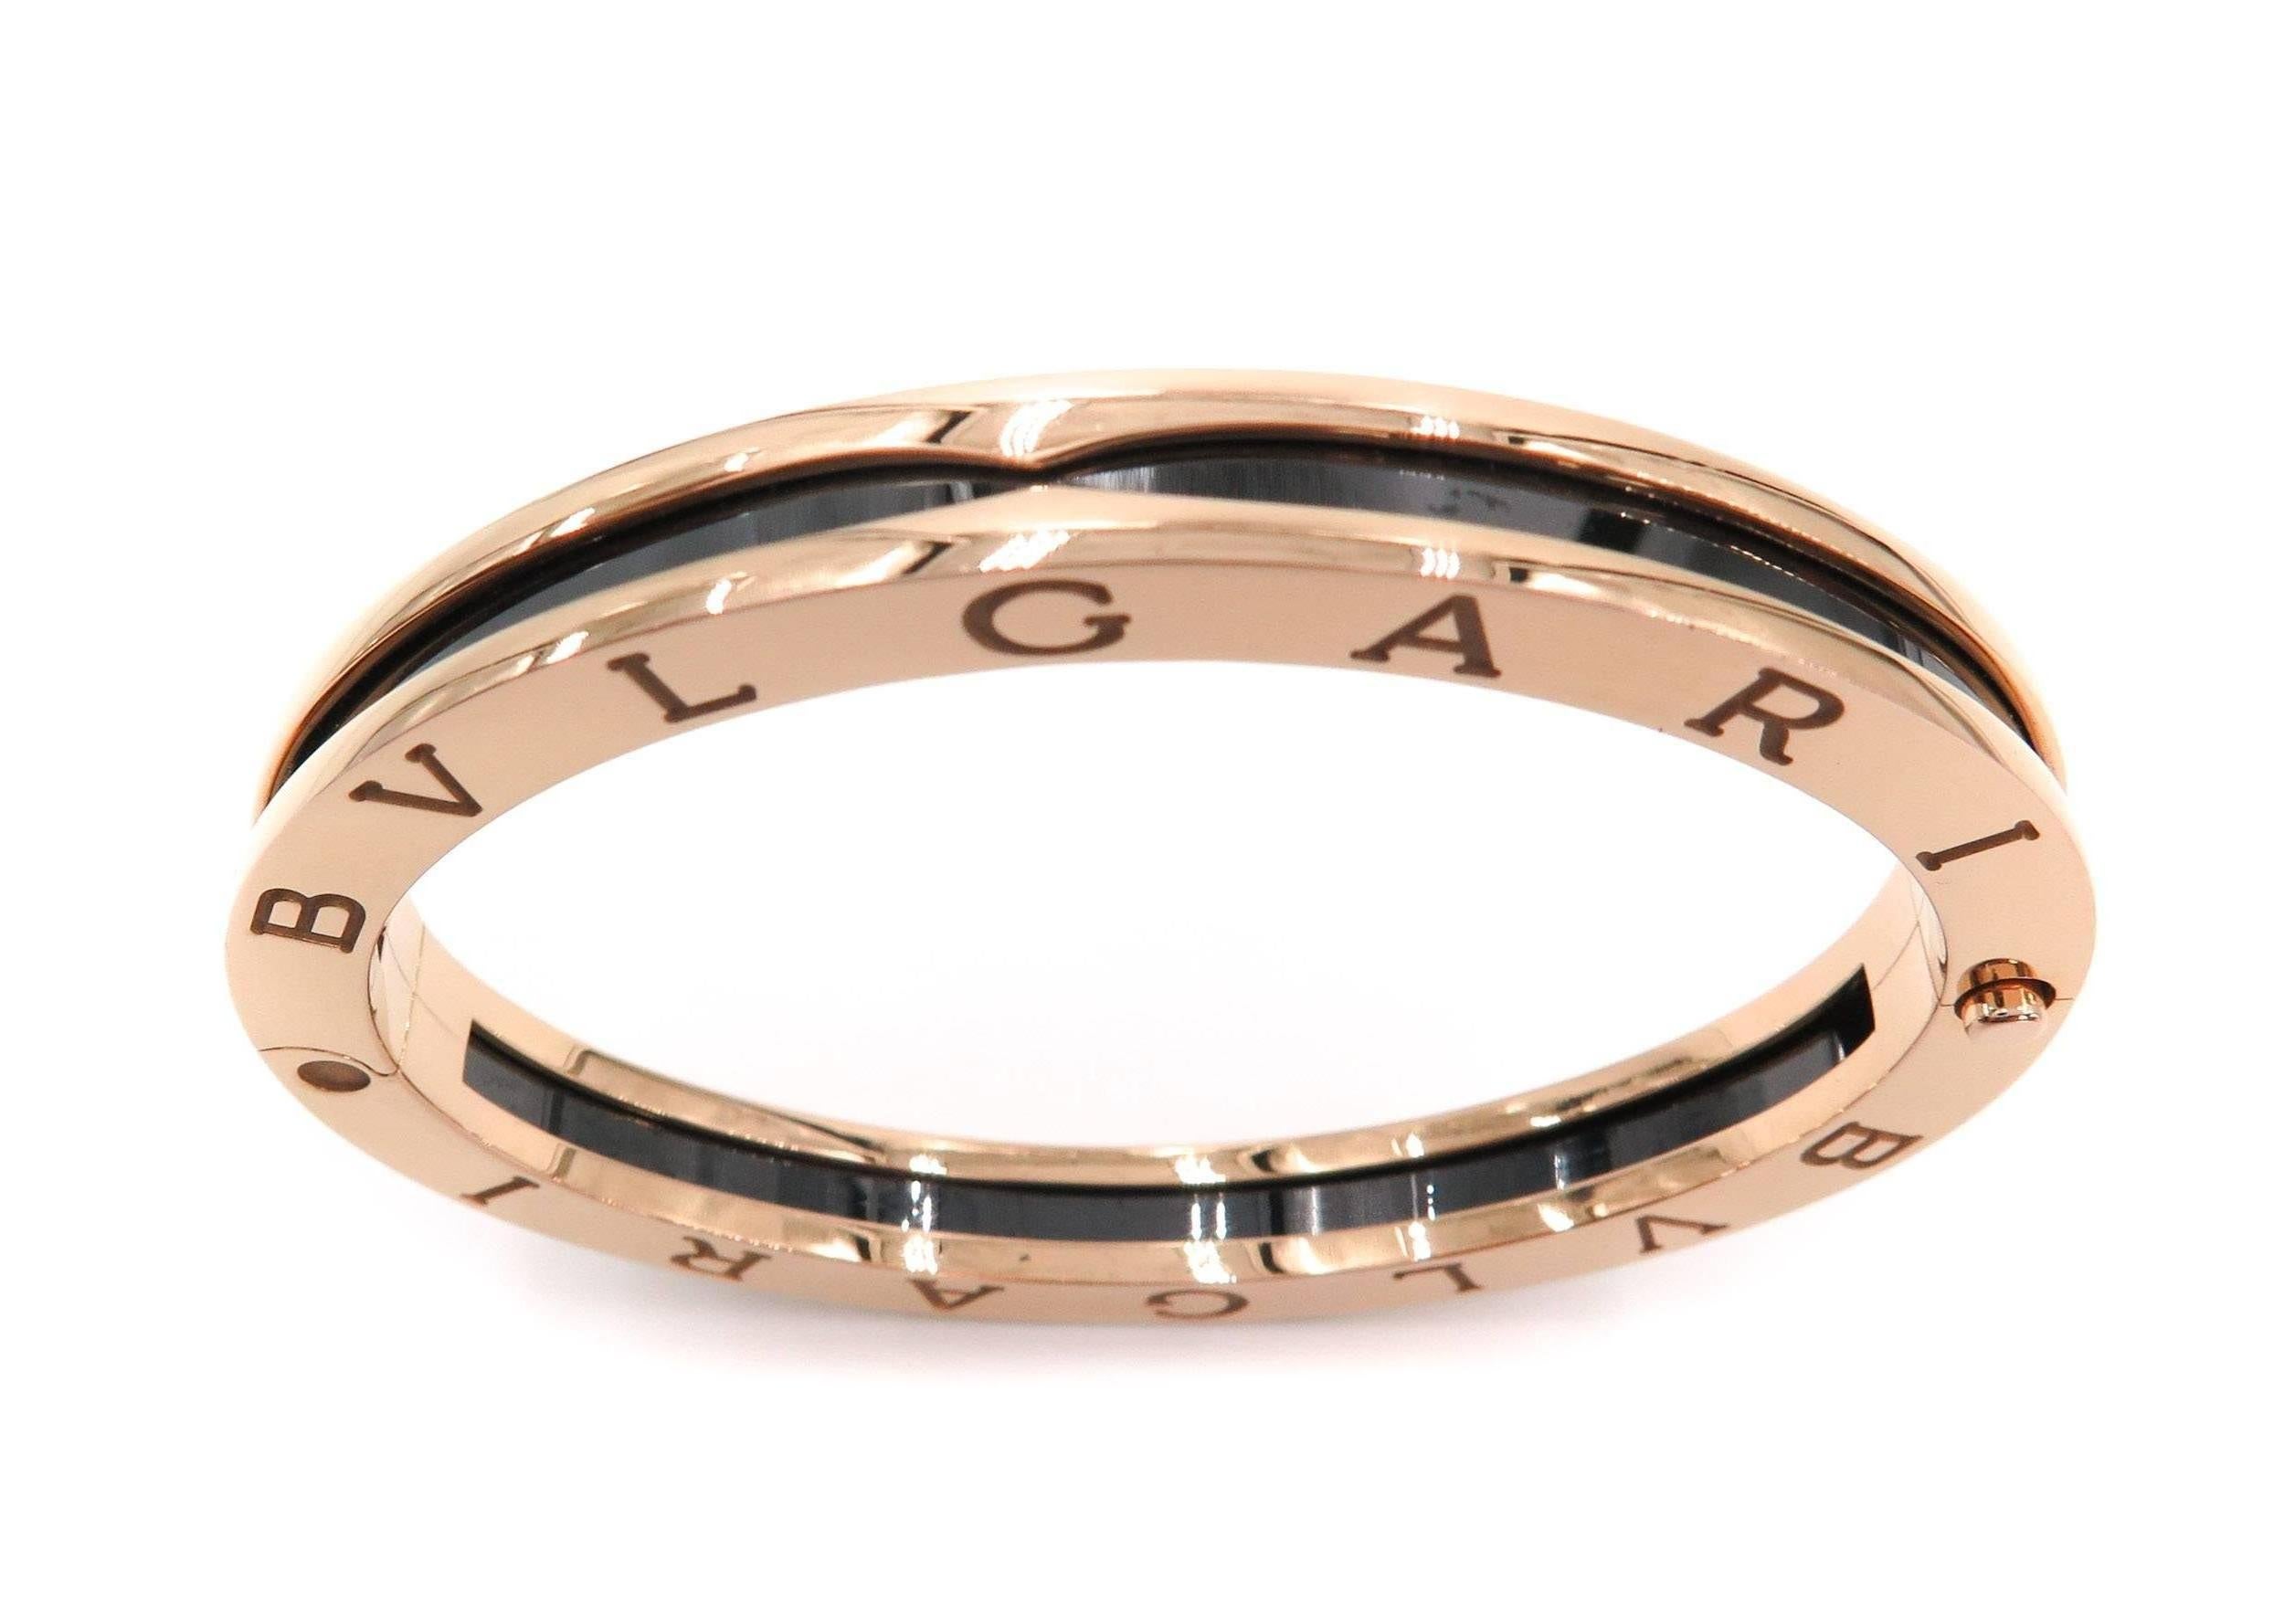 Bulgari has been synonymous with Italian designed jewelry, with inspirations drawn from the classical Roman world.
Bulgari's bold design is reflected in this contemporary signature bangle bracelet inspired by the inscriptions on ancient coins,